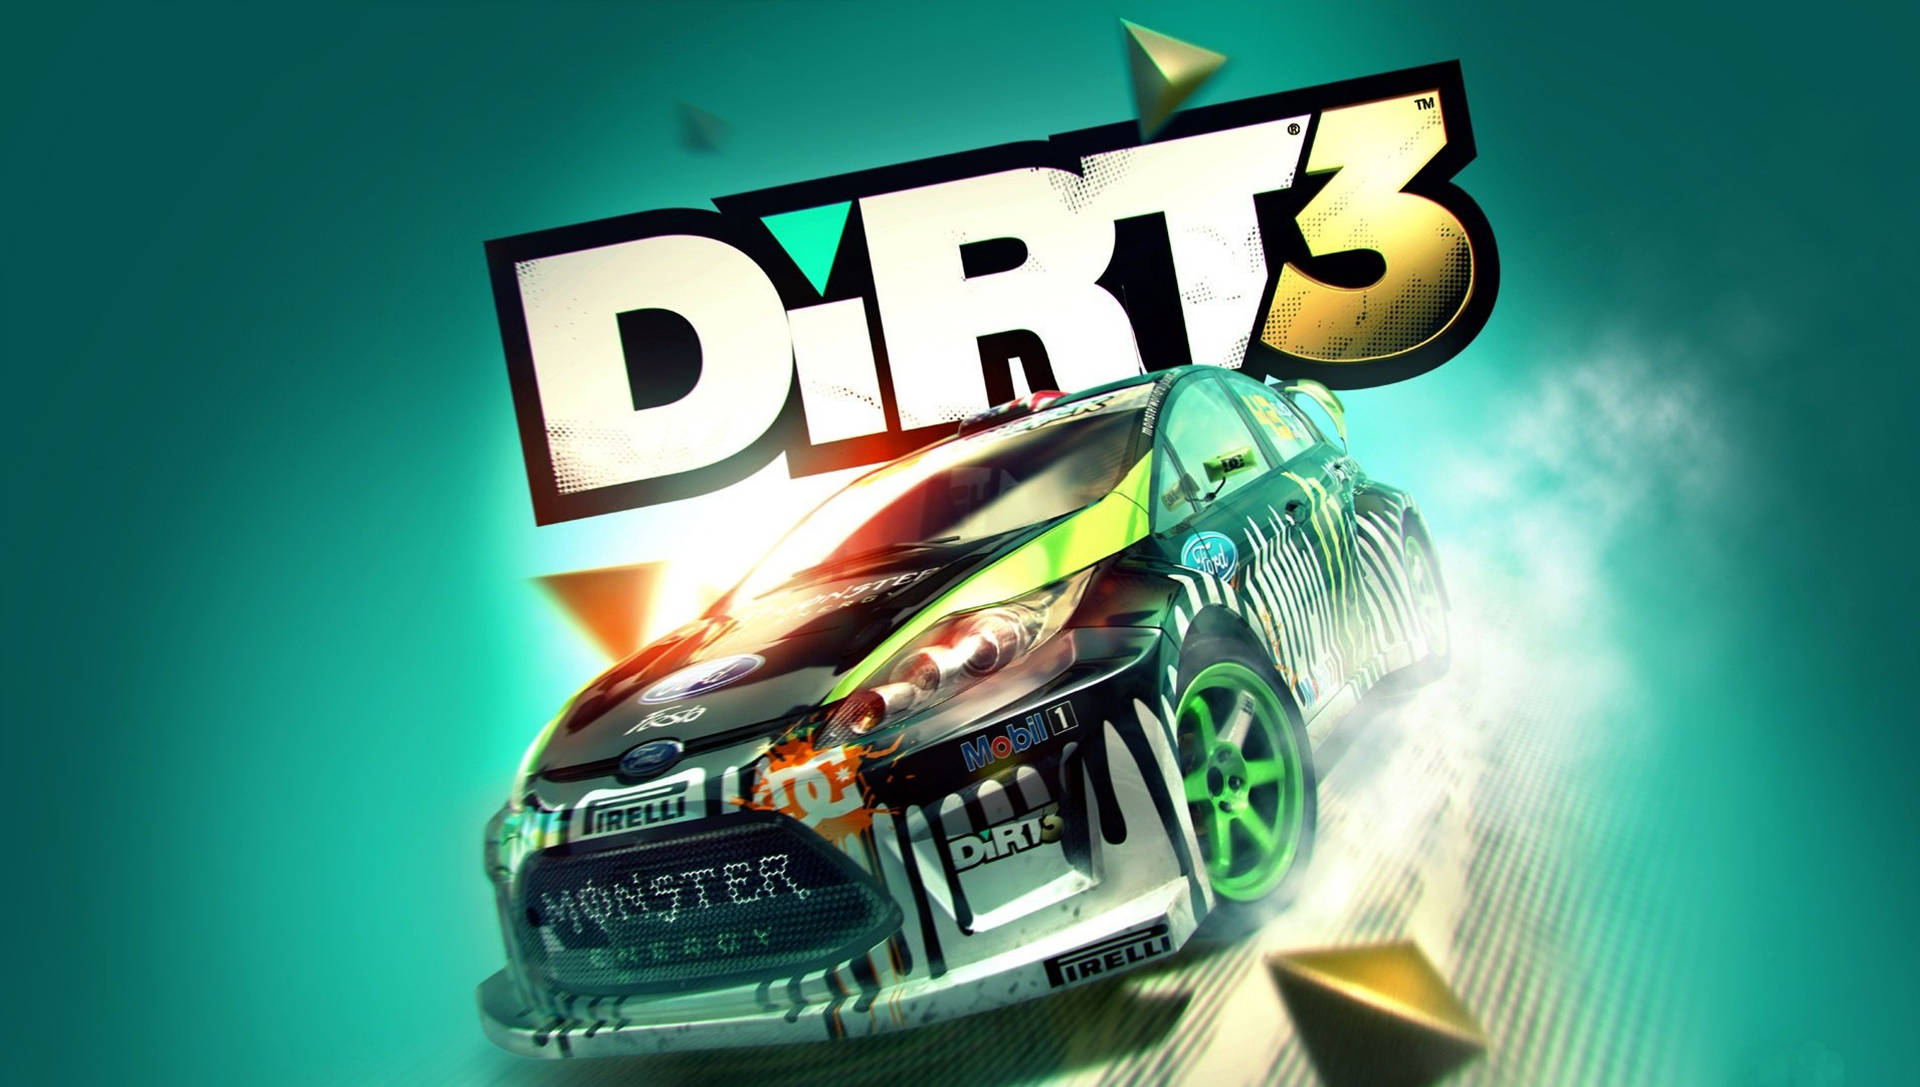 Dirt 3 Promo Poster Background